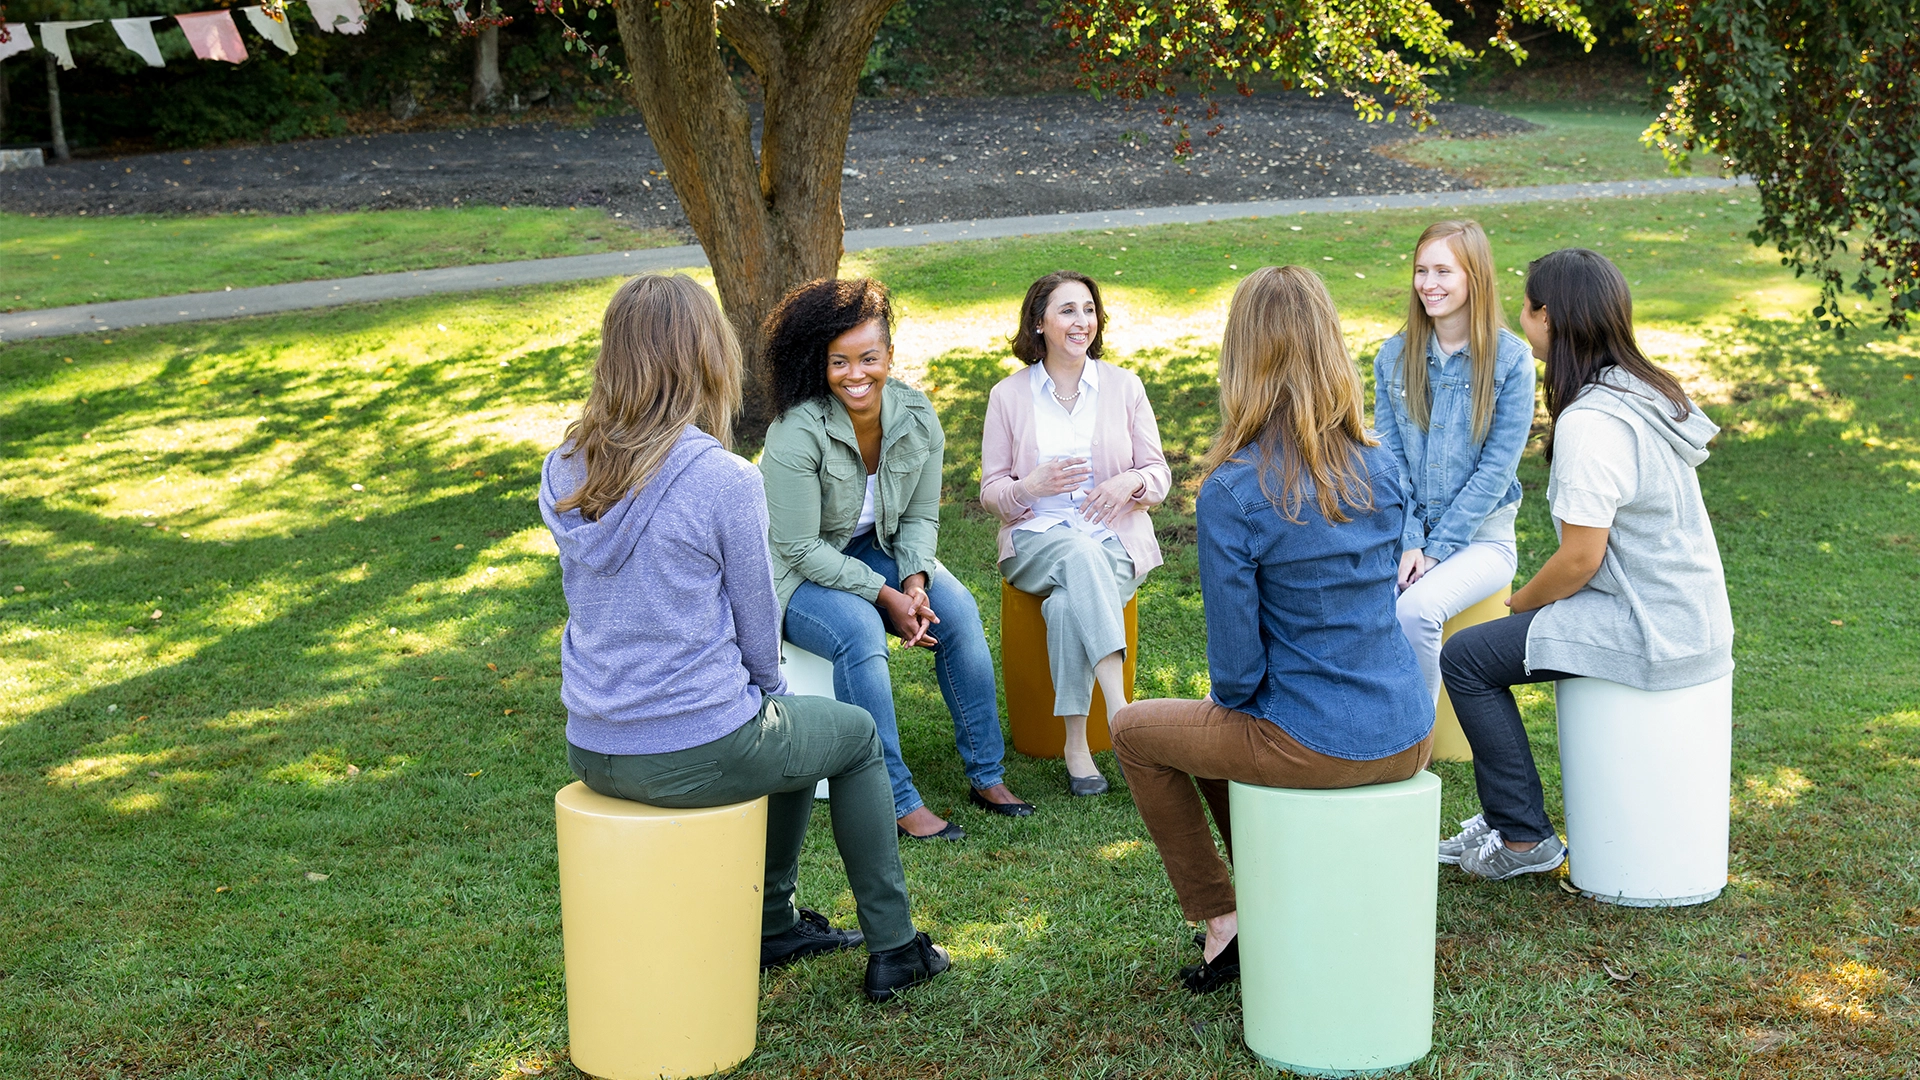 Women's counseling group at Mountainside addiction treatment center in Canaan, CT.